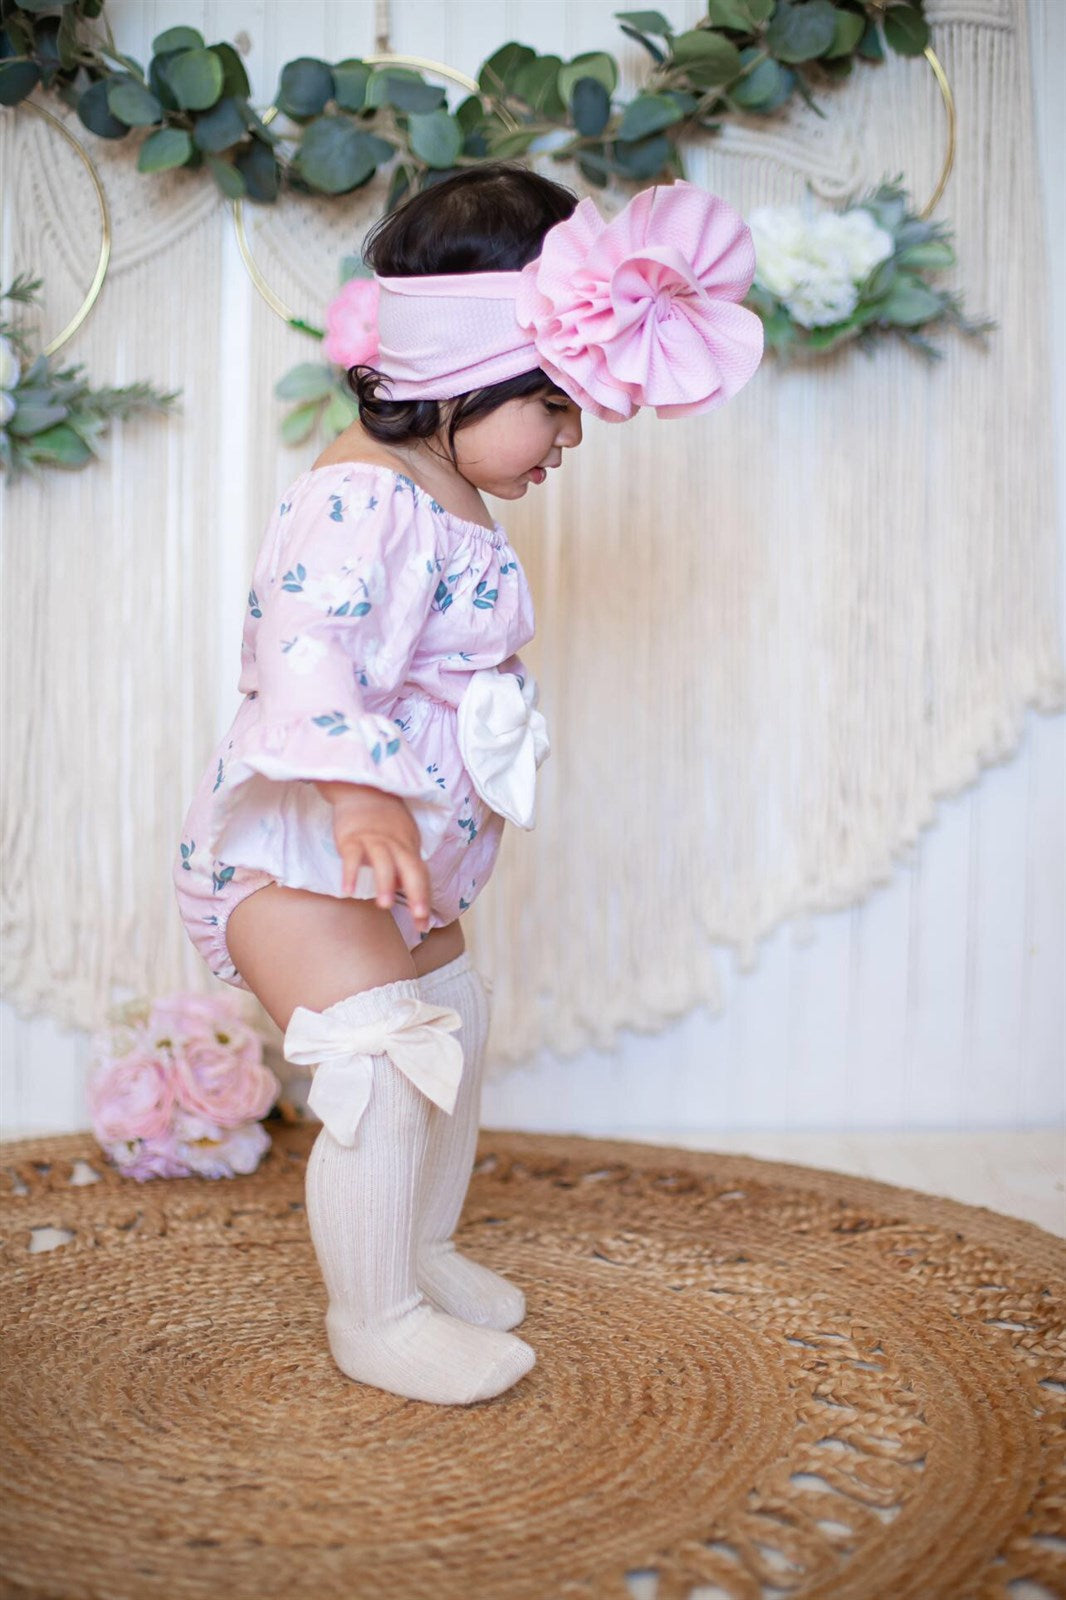 Baby Girls Off-Shoulder Pink Floral Belle Sleeves with White Bow Romper